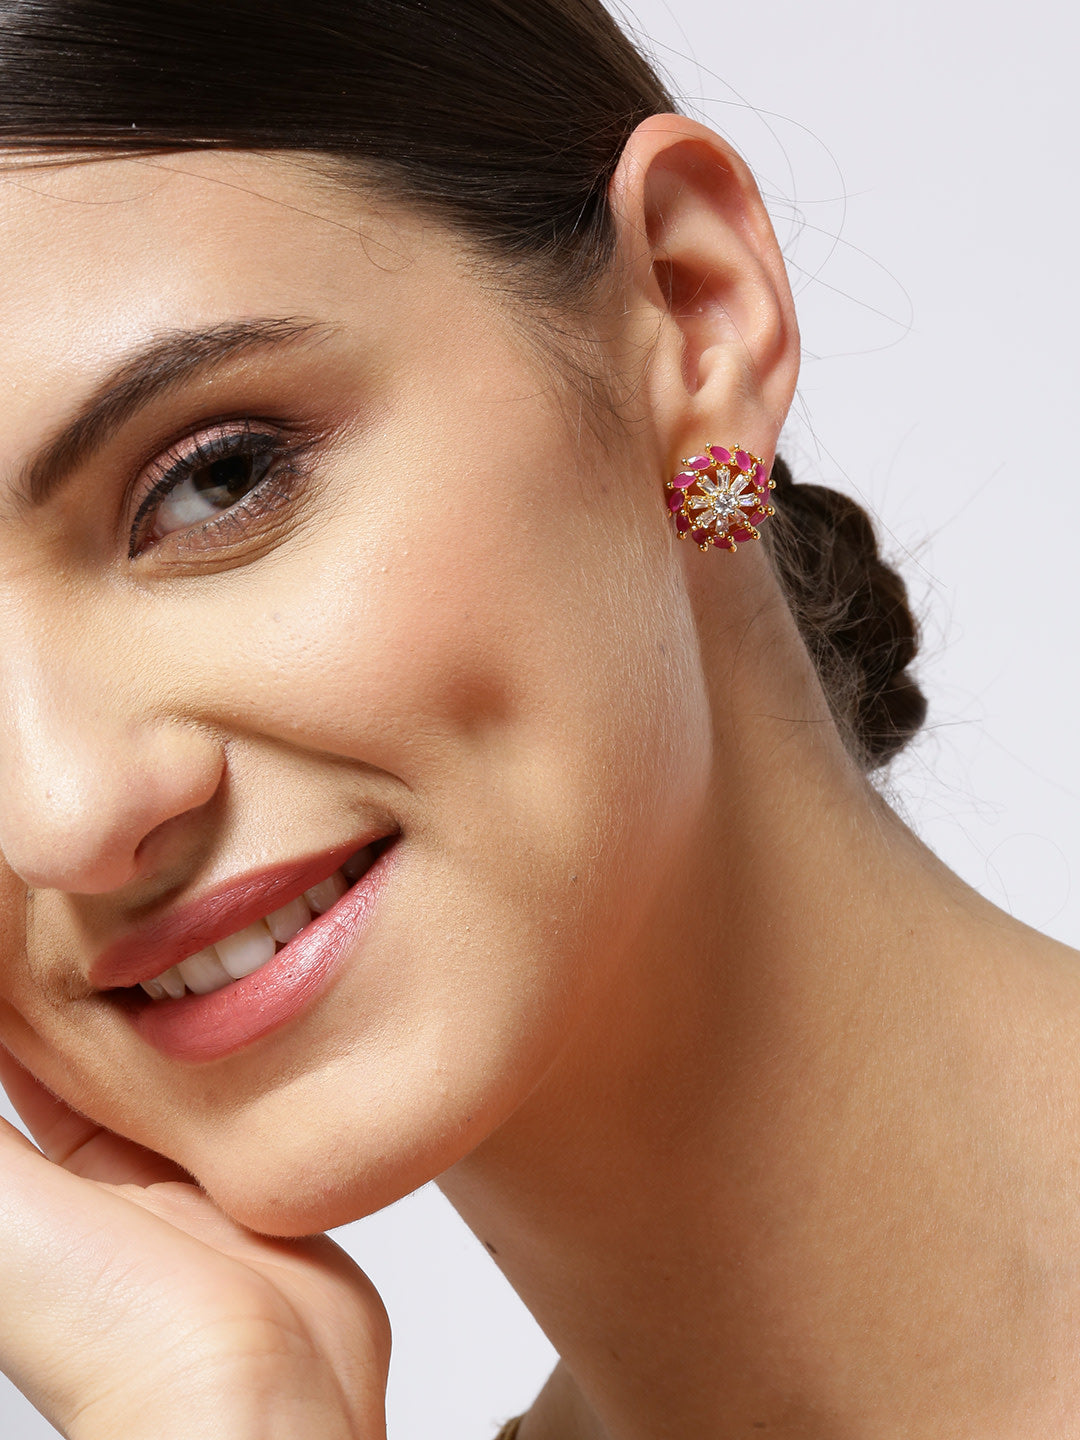 Gold-Plated American Diamond and Ruby Studded Floral Stud Earrings